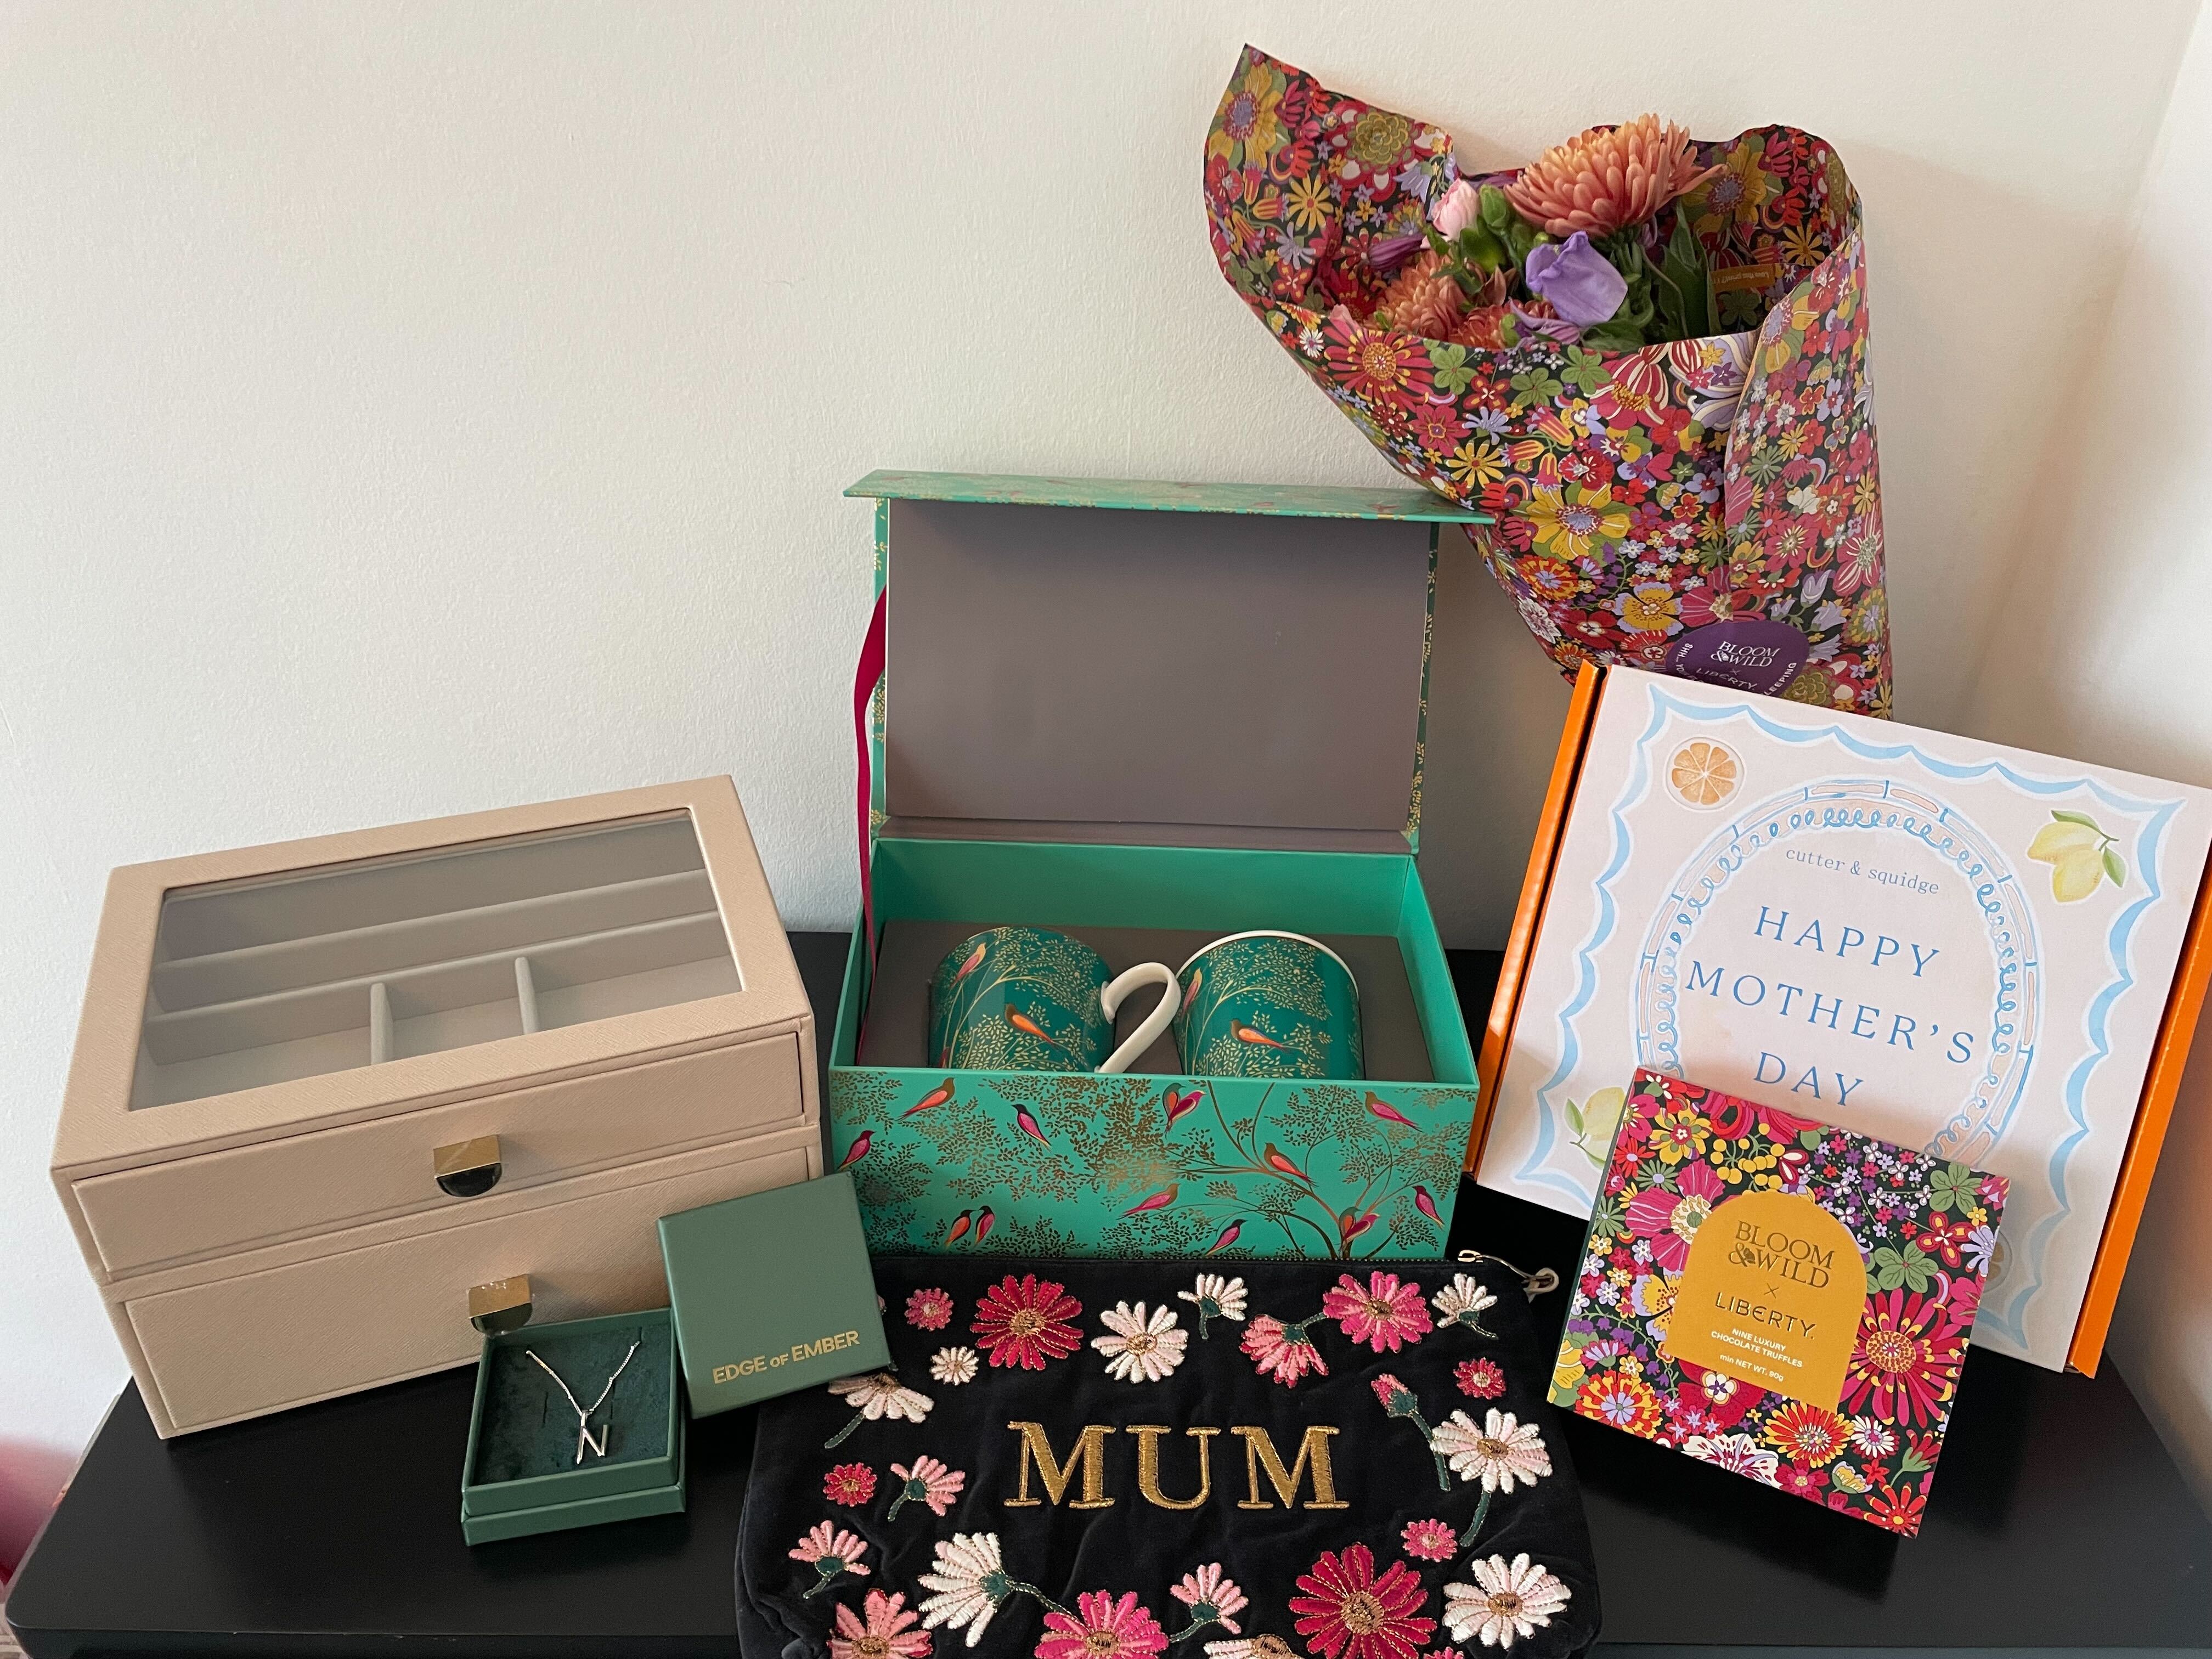 The 10 Best Mother's Day Gifts In 2023 - Inspired By This